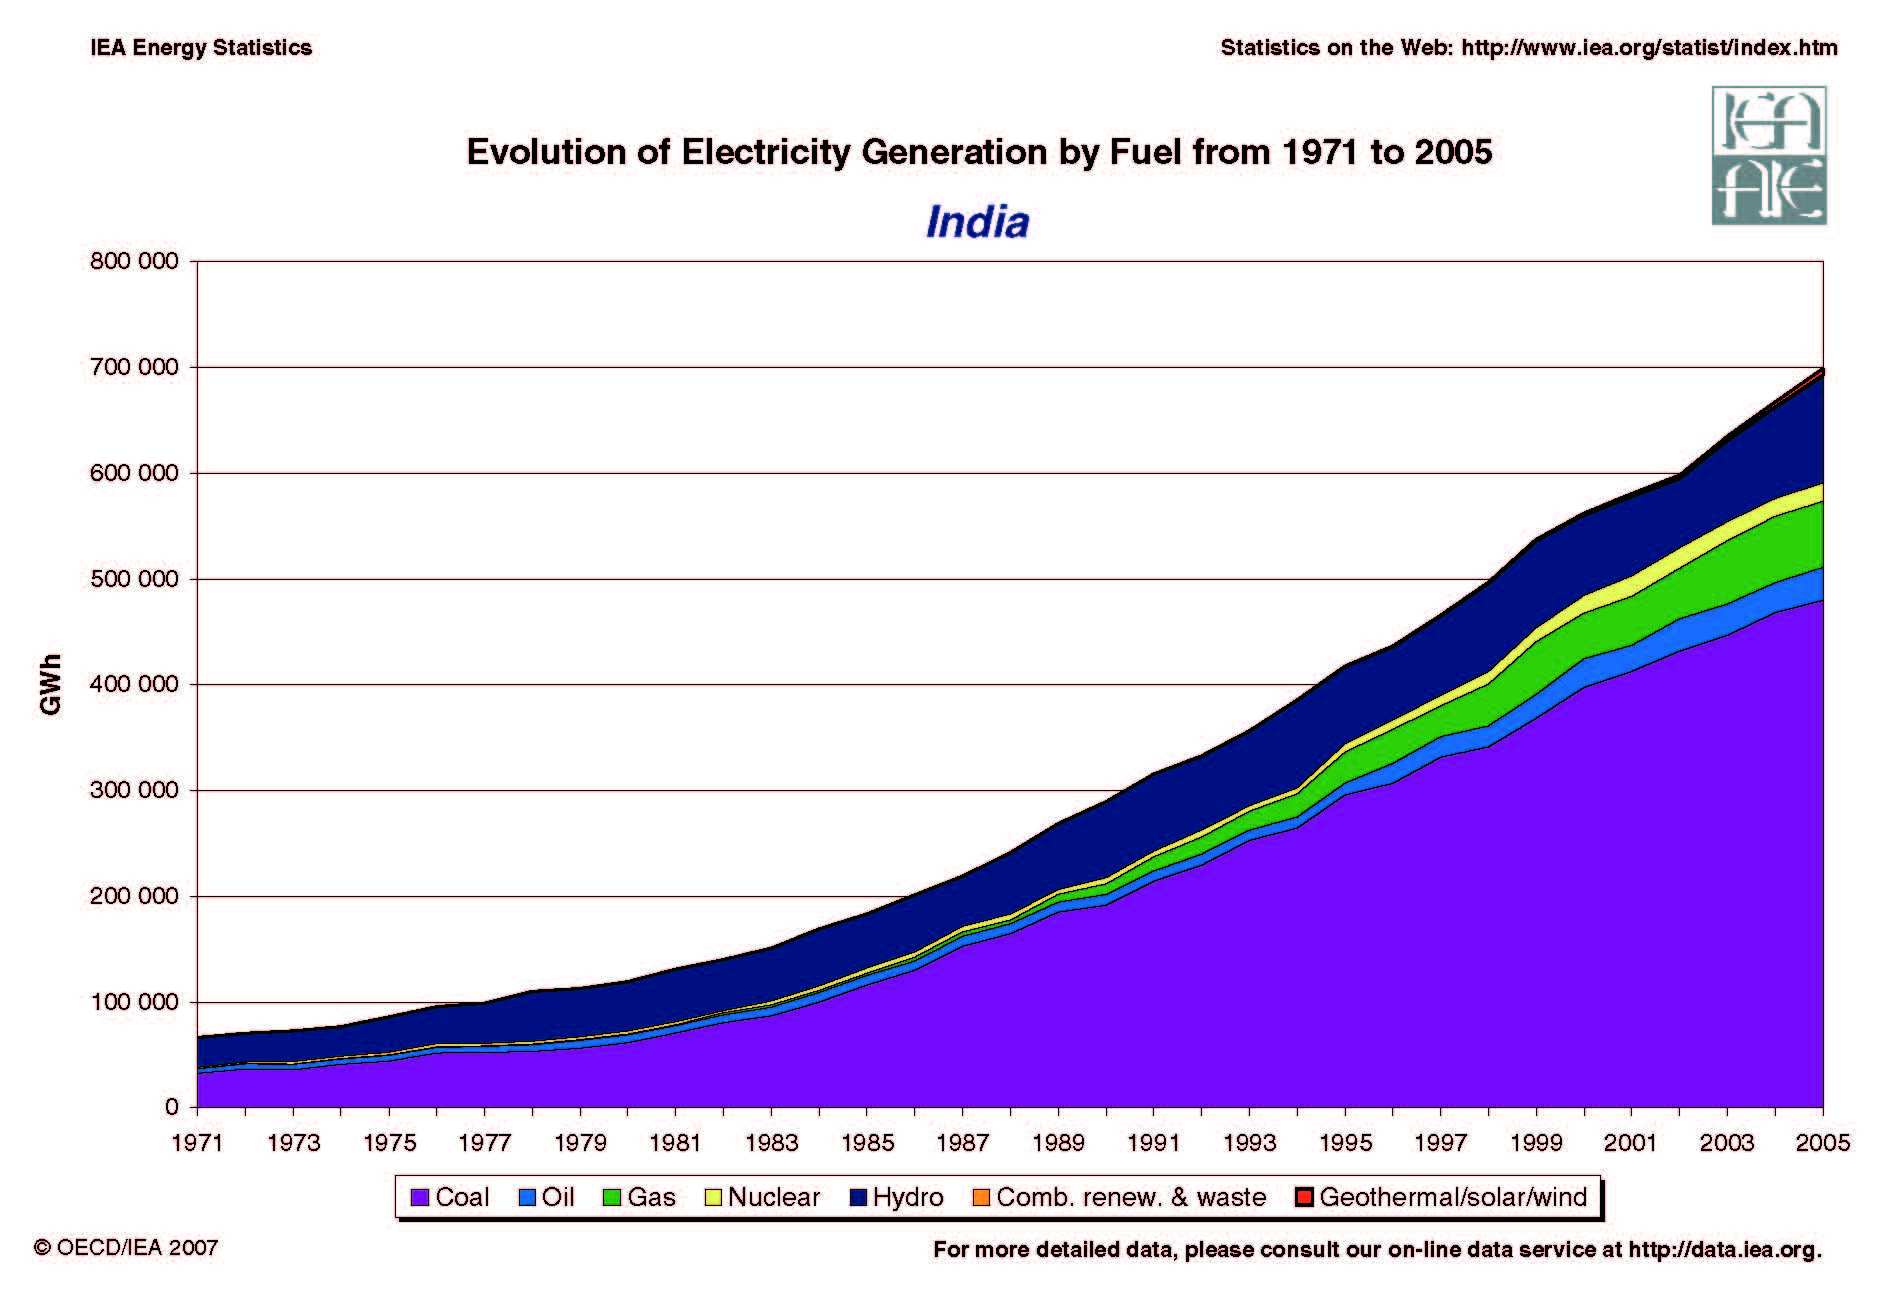 India Evolution of Electricity Generation by Fuel 1971 - 2005